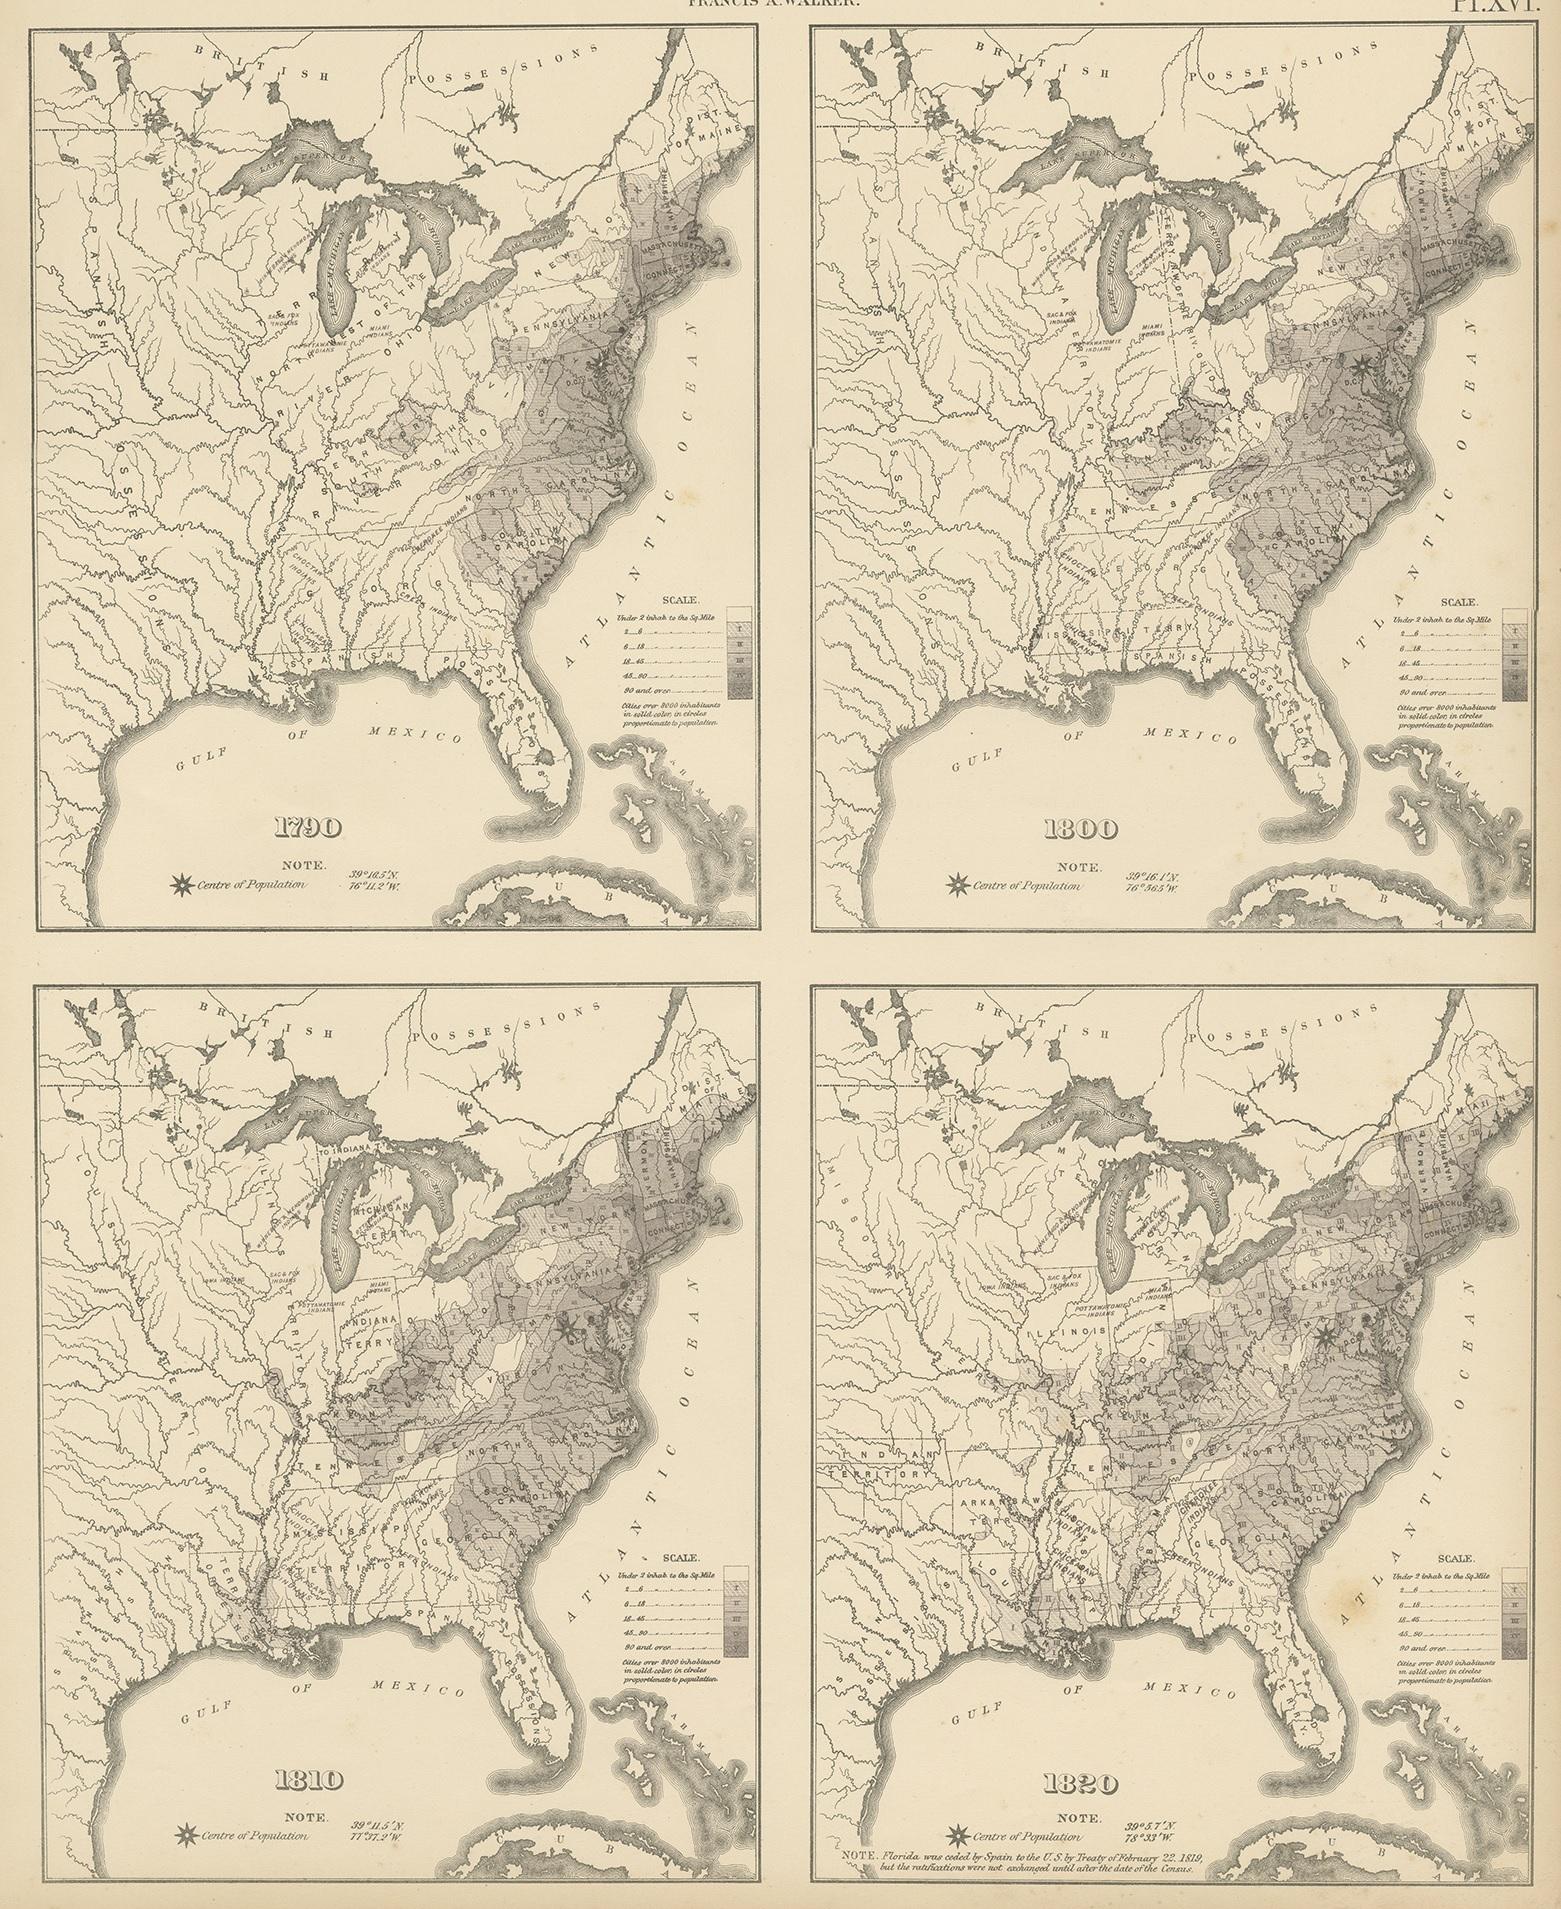 Antique chart titled 'The progress of the nation, 1790-1820. Maps showing in five degrees of density the distribution within the territory east of the 100th meridian of the population of the United States, excluding Indians not taxed'. Chart of the